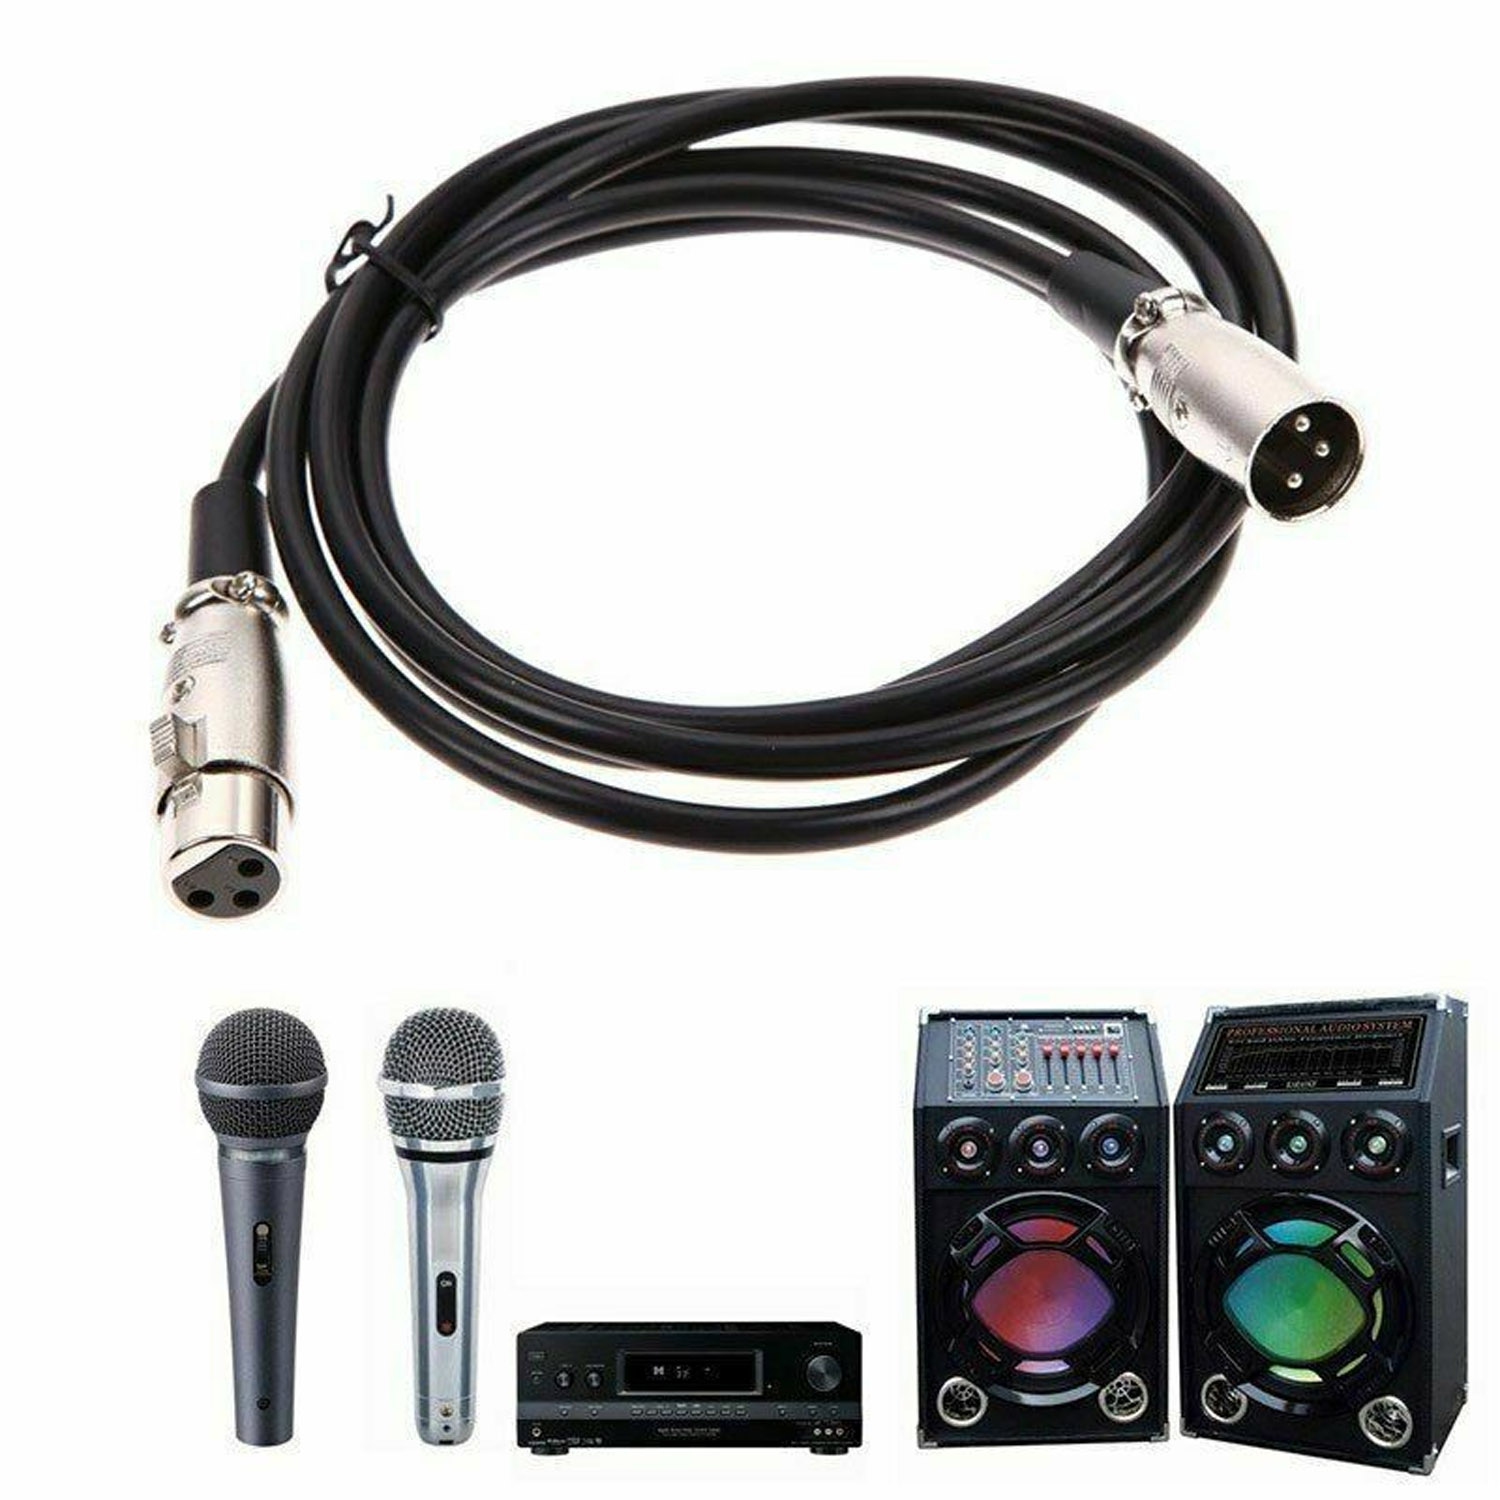 ISTAR Flexible Premier Series 3 Pin XLR Male to XLR Female Cable 2 Meter  XLR Cable Microphone Extension Balanced Audio Cable for Phantom Power,  Amplifier Mixer